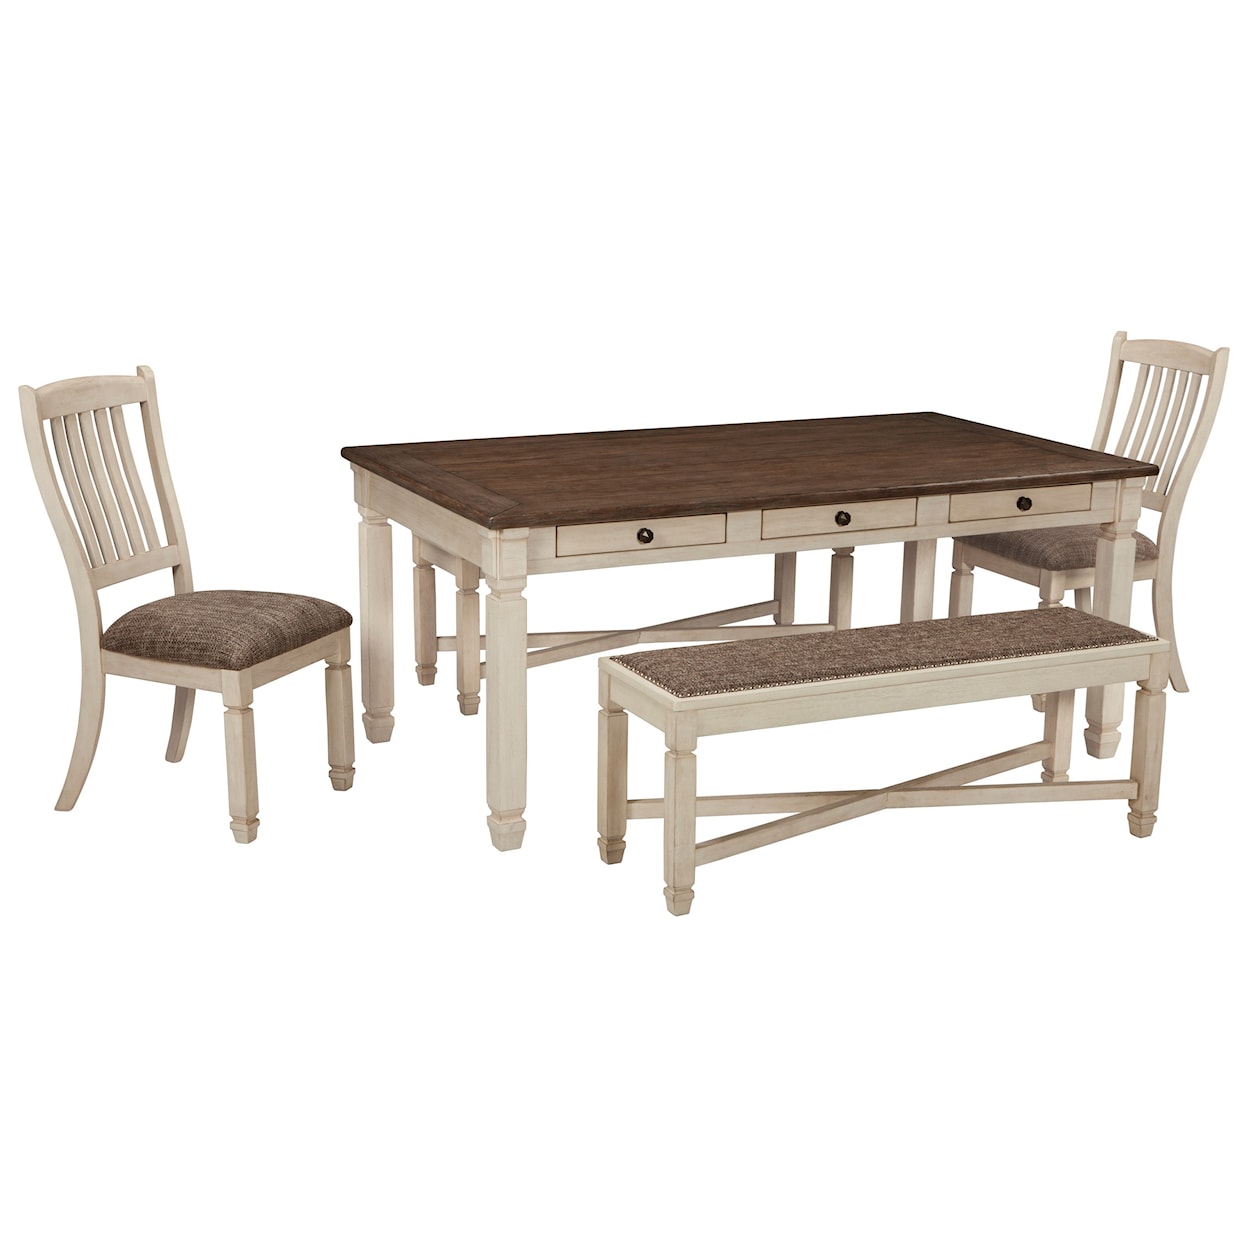 Michael Alan Select Bolanburg Table and Chair Set with Bench